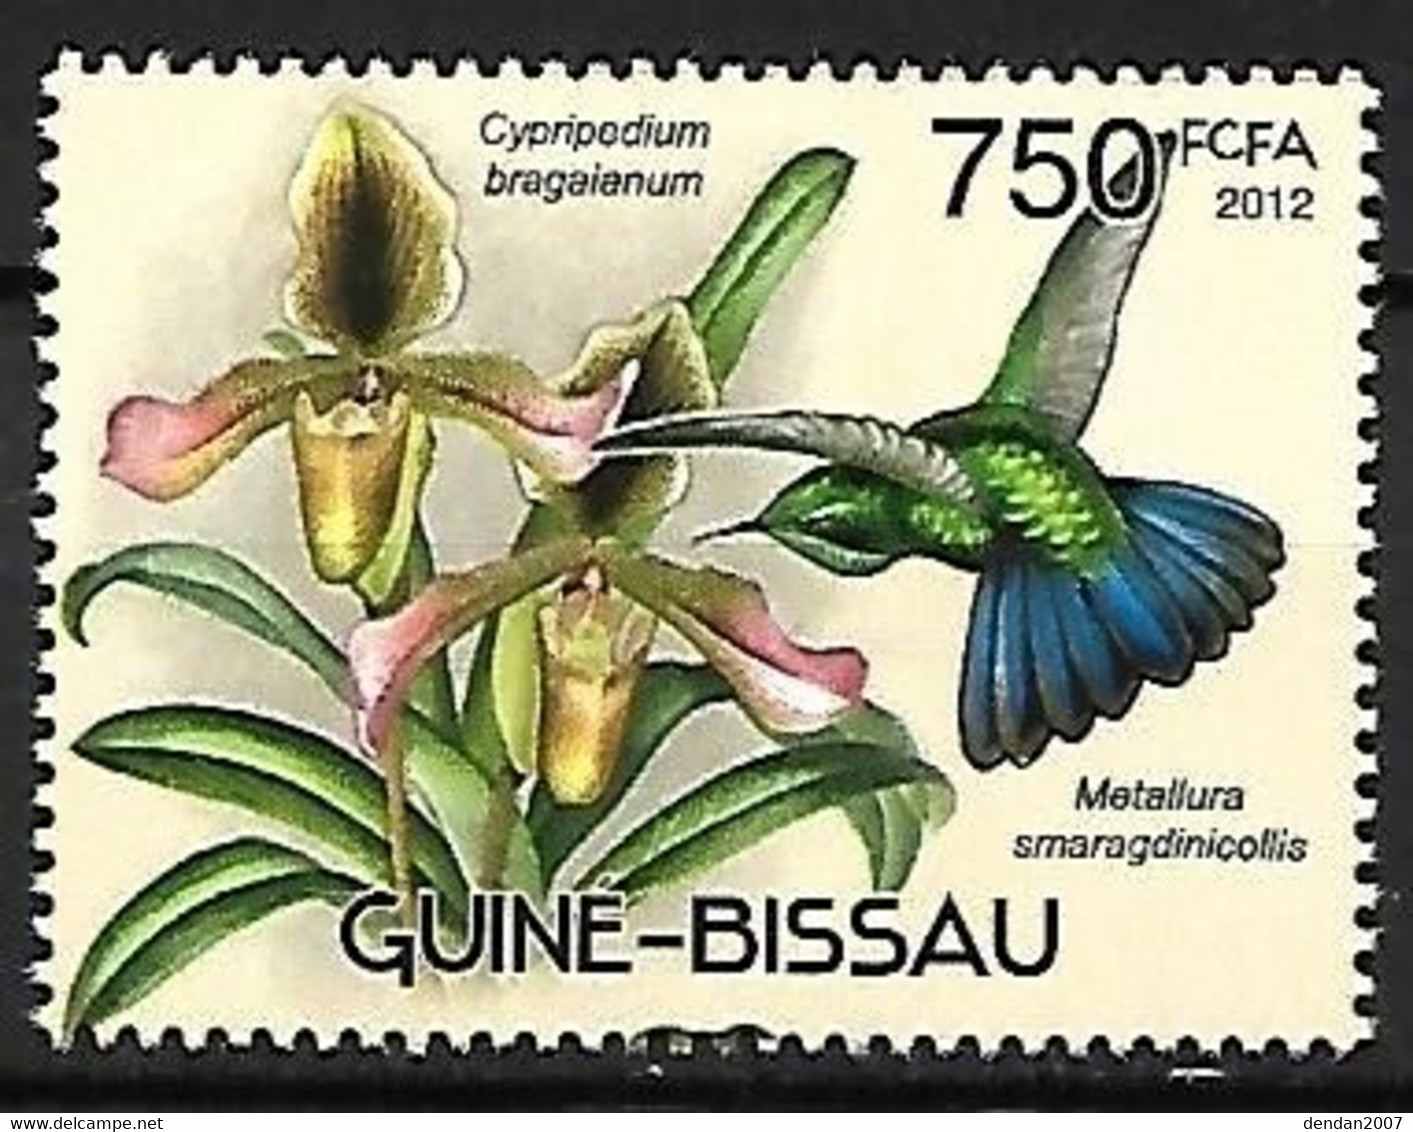 Guinea Bissau - MNH ** 2012 : Hummingbirds And Orchids : Tyrian Metaltail   - Metallura Tyrianthina - Colibrì